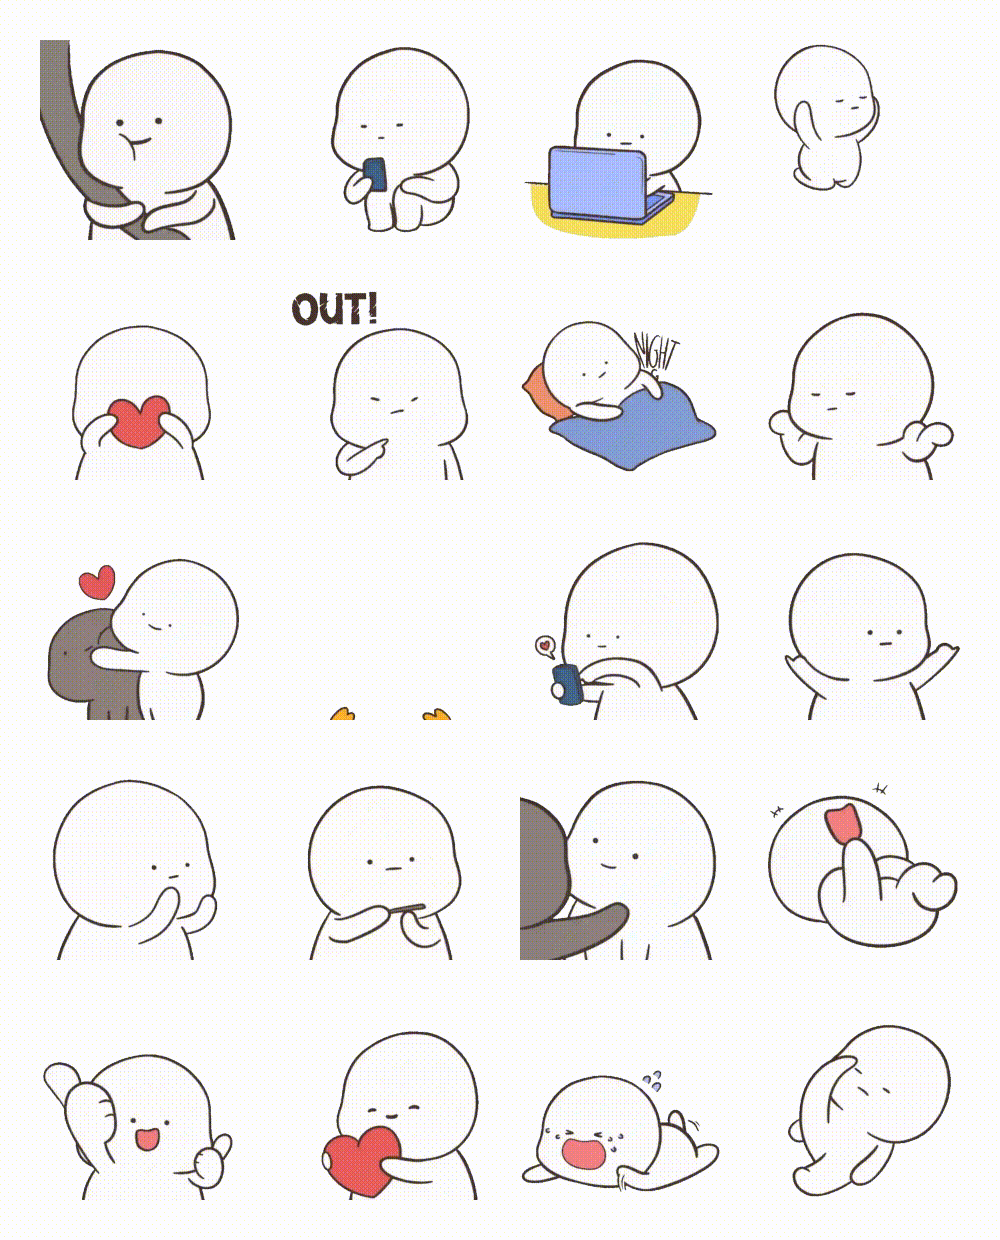 Snowy Animation/Cartoon sticker pack for Whatsapp, Telegram, Signal, and others chatting and message apps